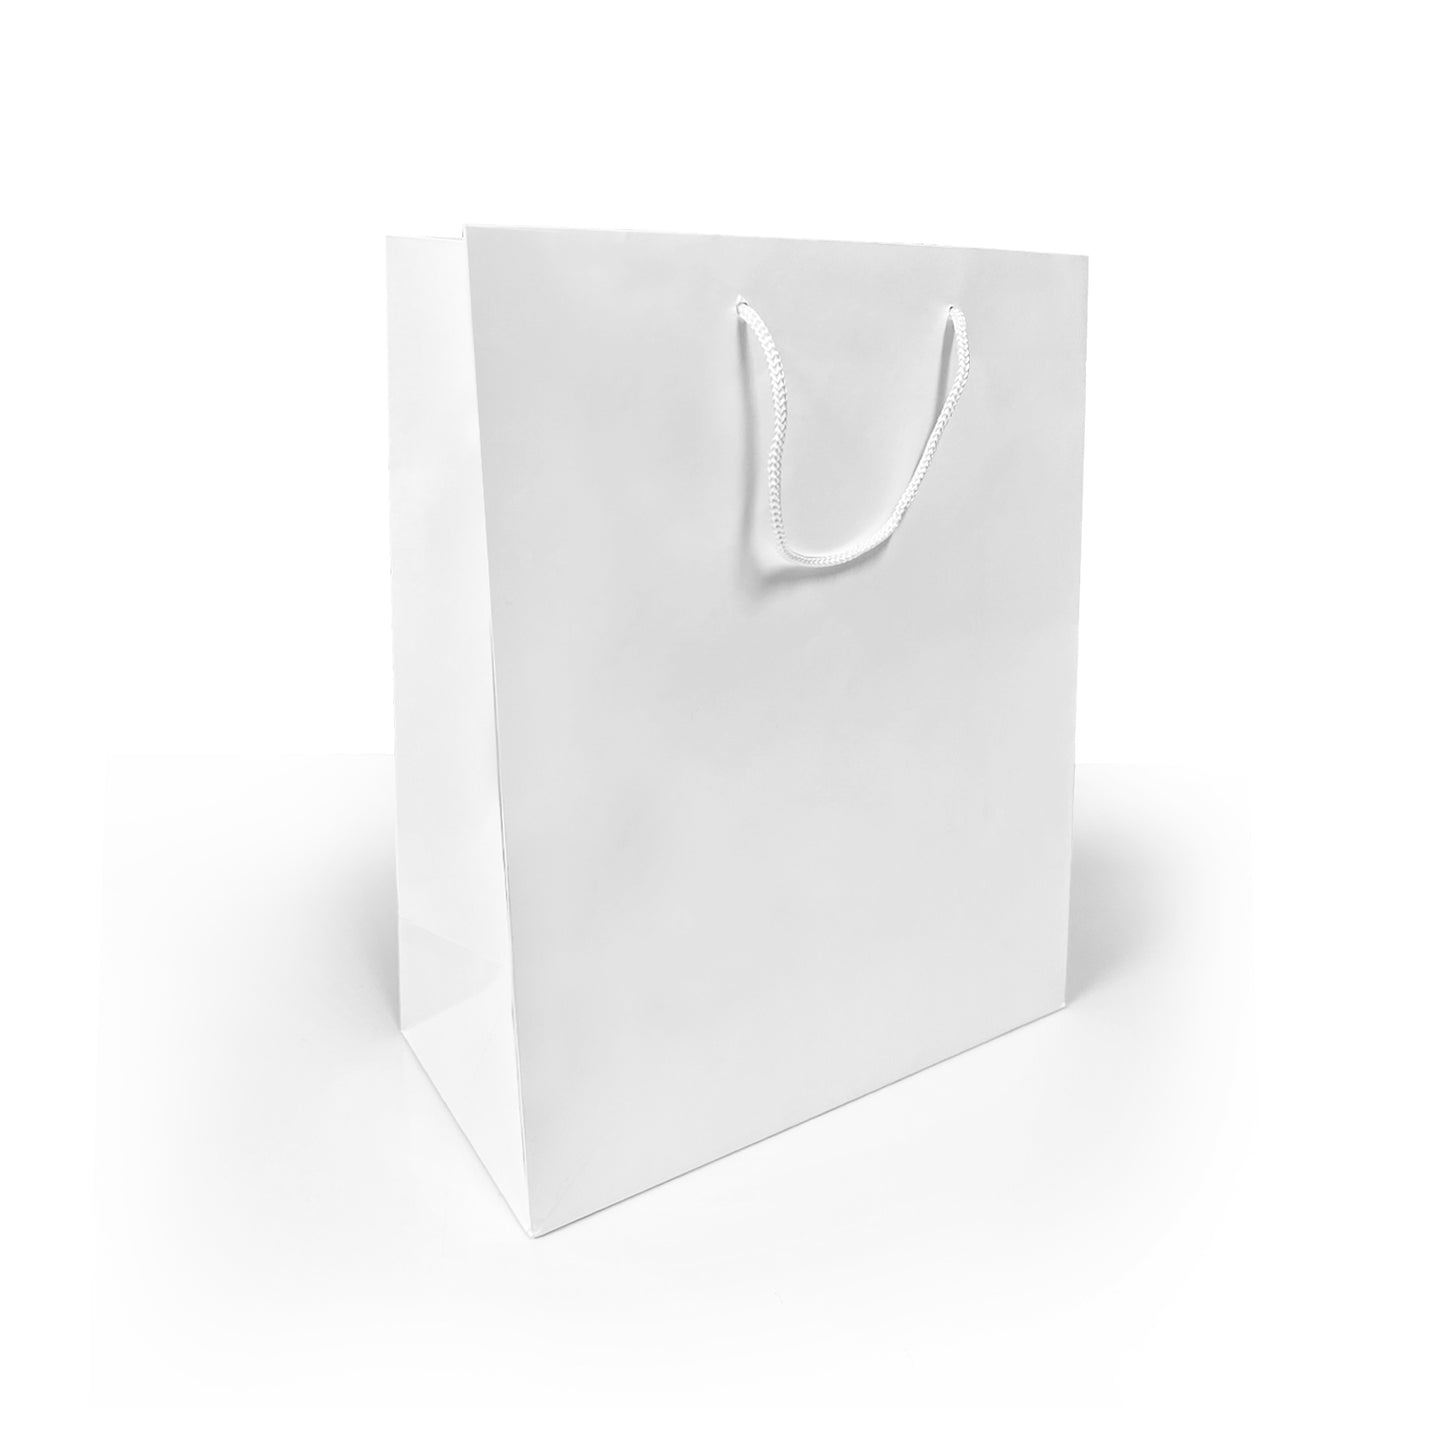 150 Pcs, Debbie, 10x5x13 inches, Euro Tote Paper Bags, with Rope Handle